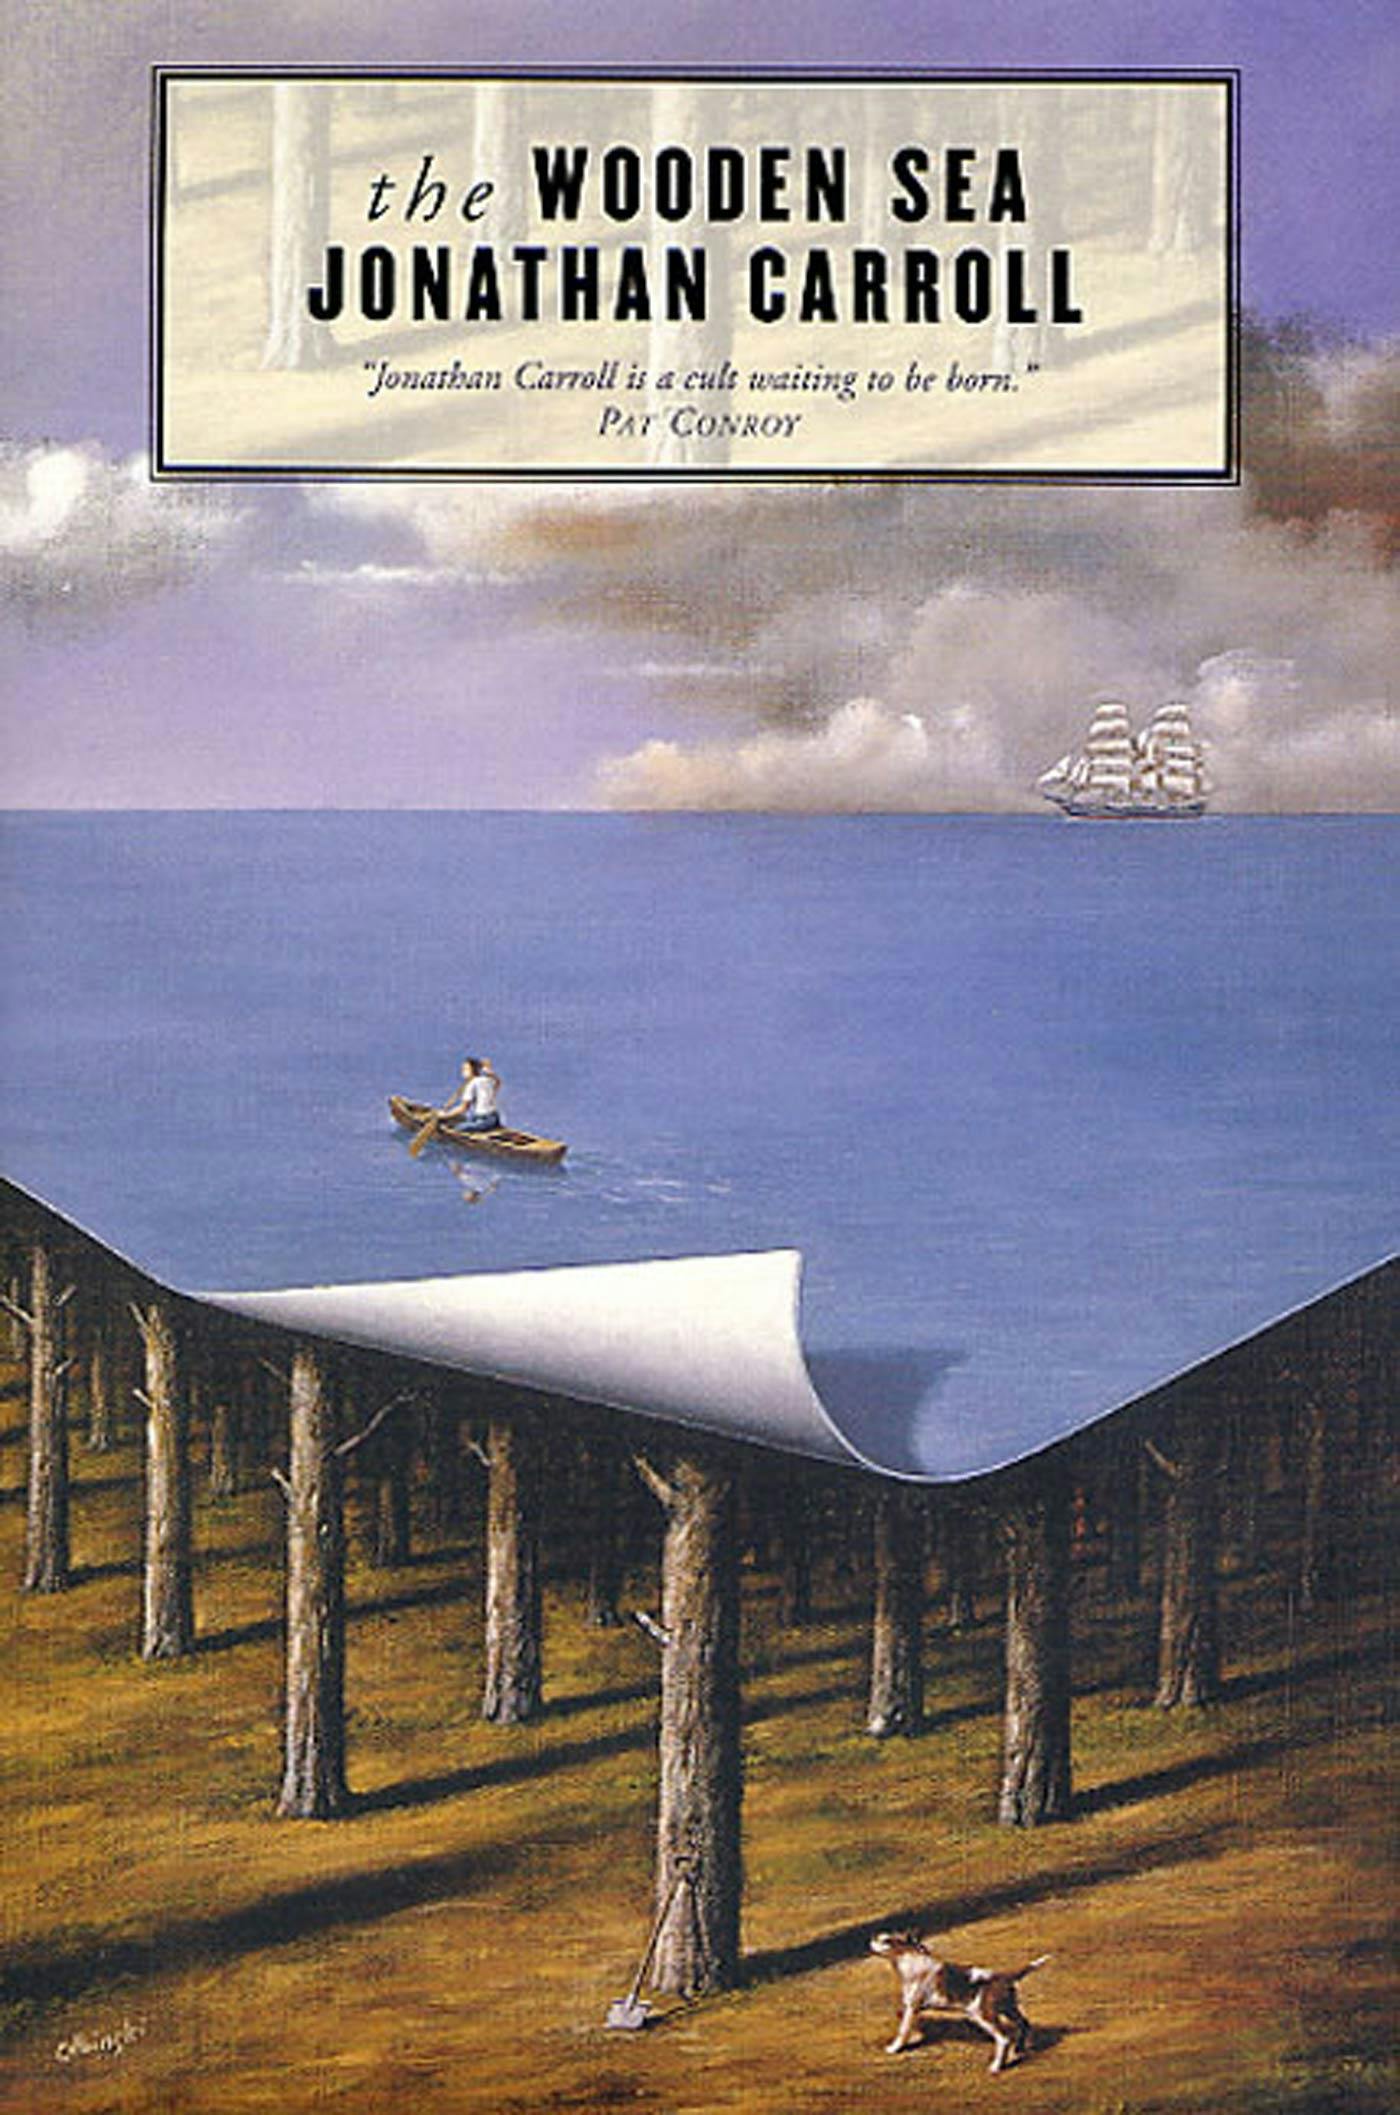 Cover for the book titled as: The Wooden Sea